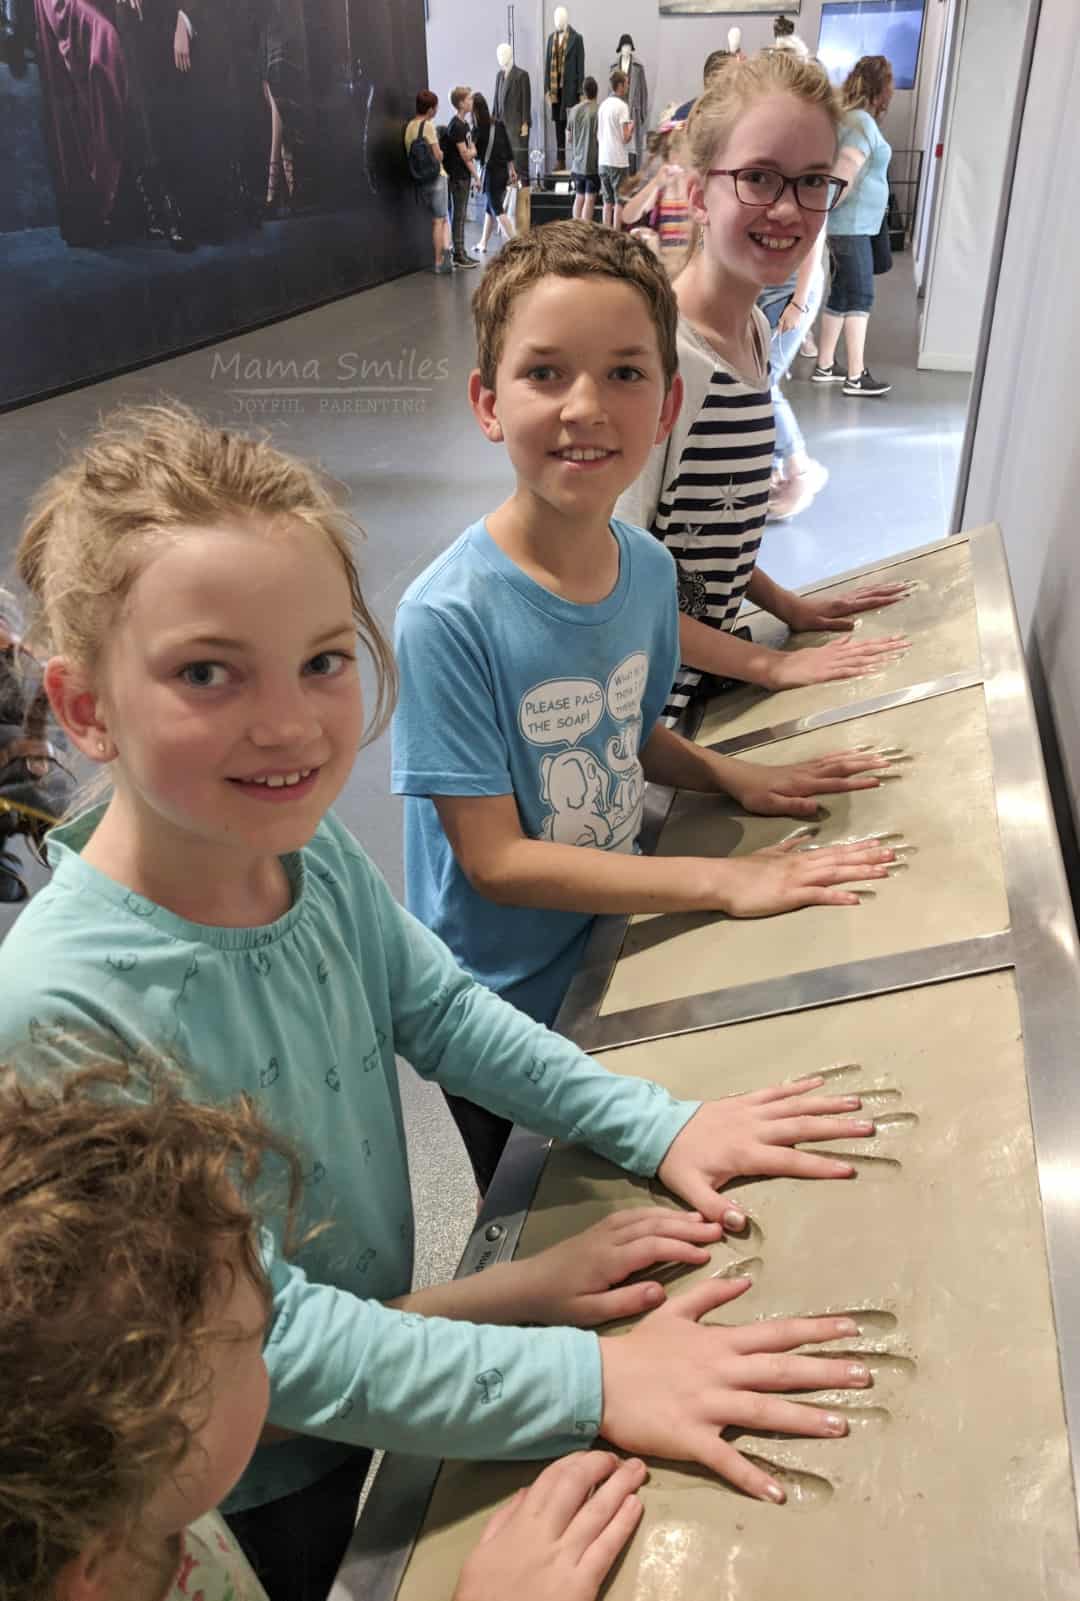 Comparing handprints with the three lead actors on the Harry Potter Warner Brothers Studio Tour.